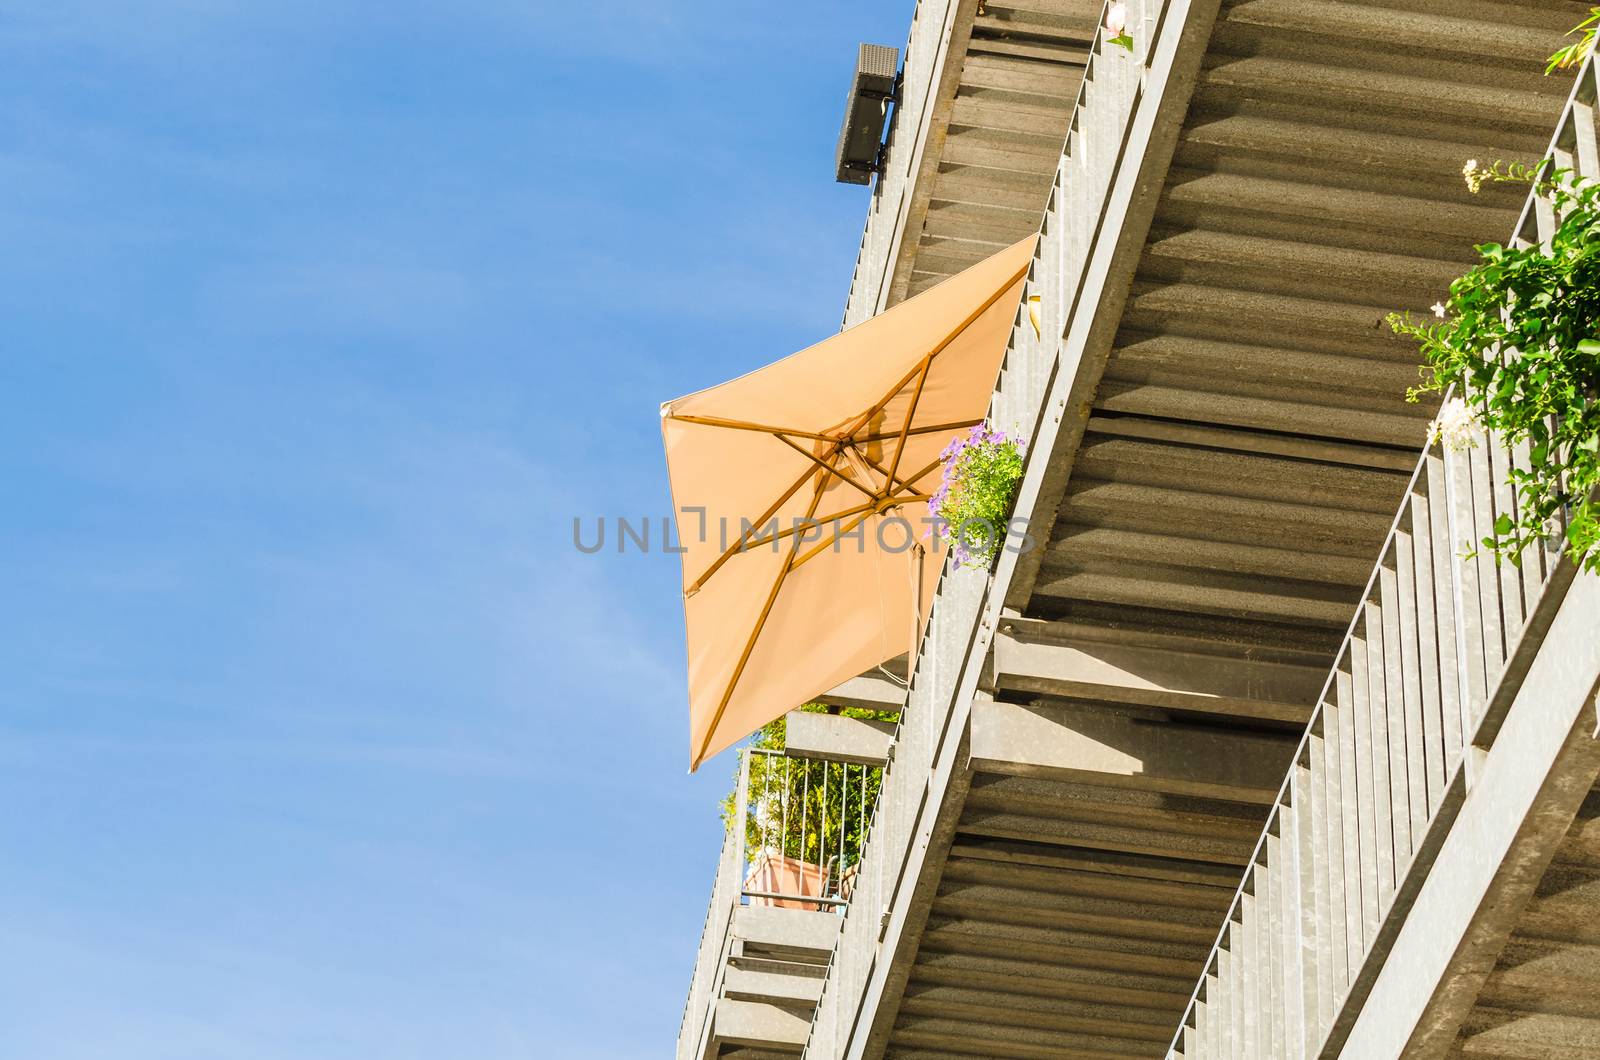 Sunshade on a terrace,  by JFsPic